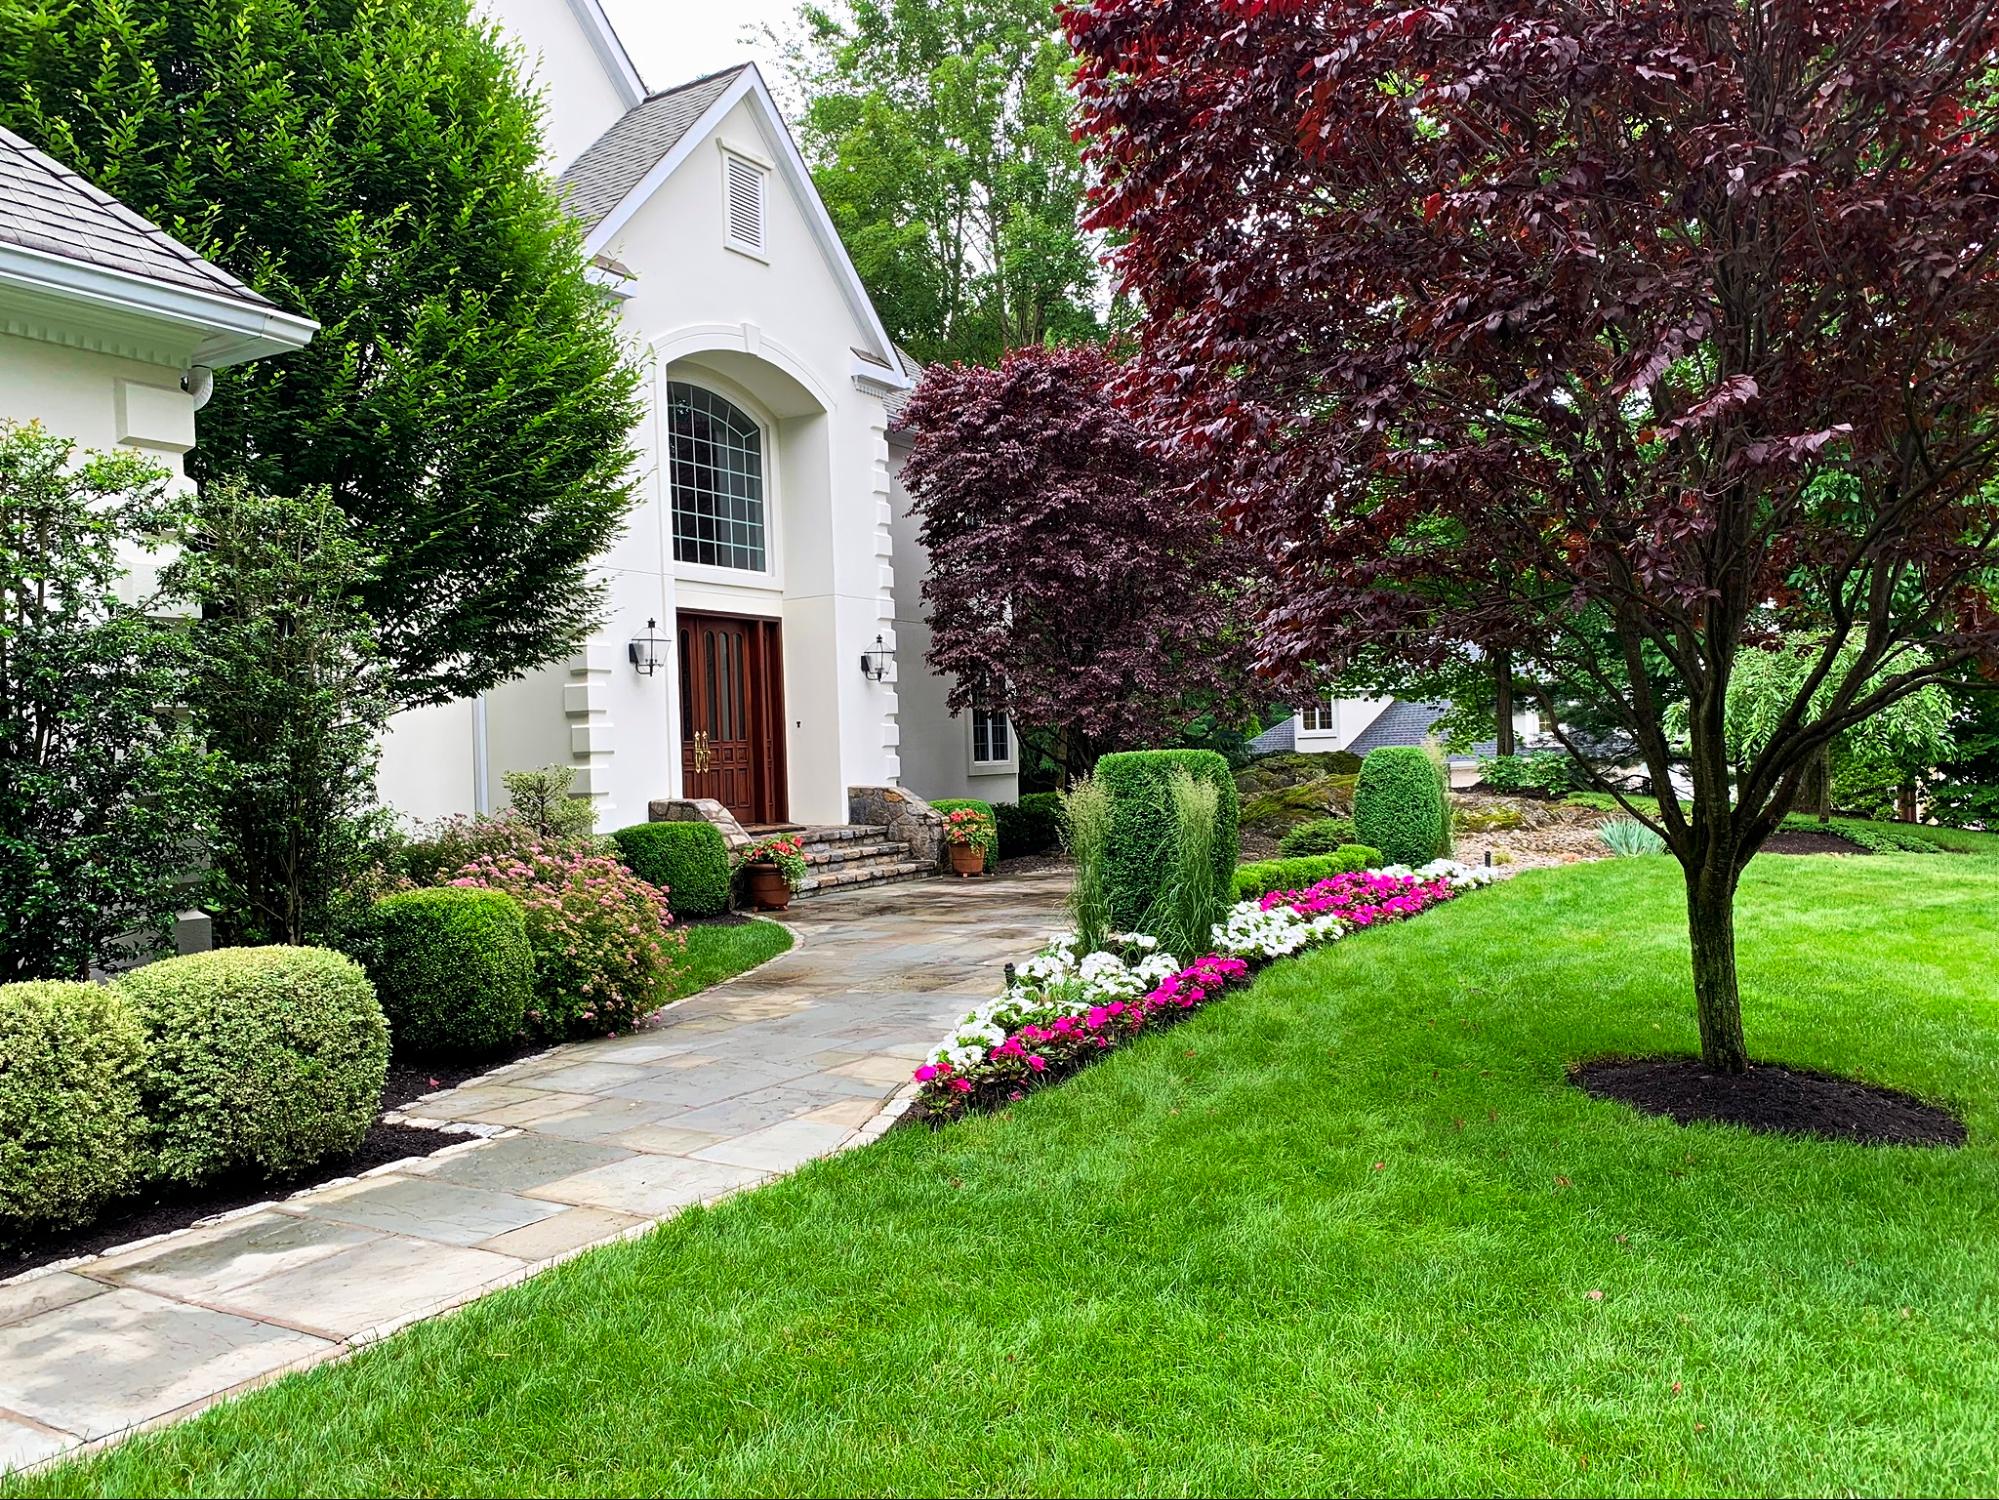  Land of ELITE is a professional landscape designer that provides landscape maintenance by planting trees, pruning shrubs, and annual mulch application